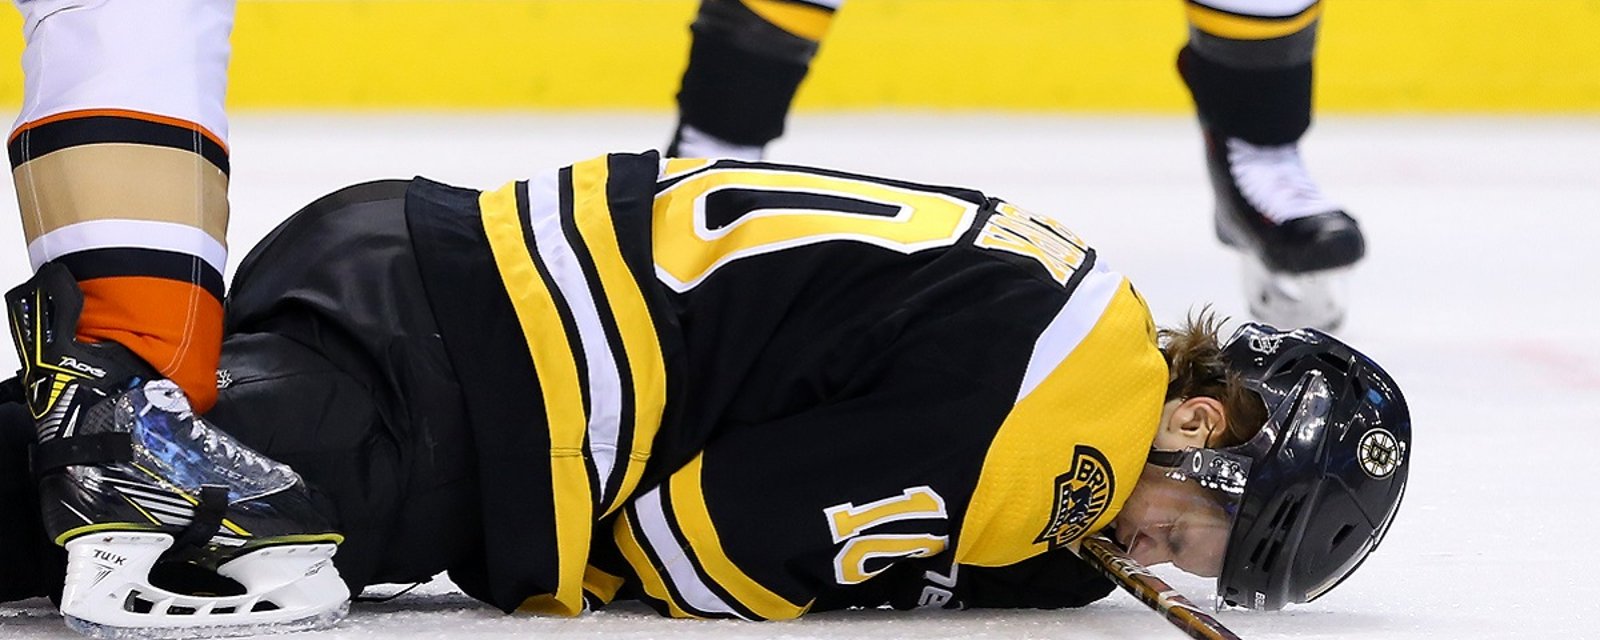 Rumor: Bruins forward has lost his roster spot due to injury.